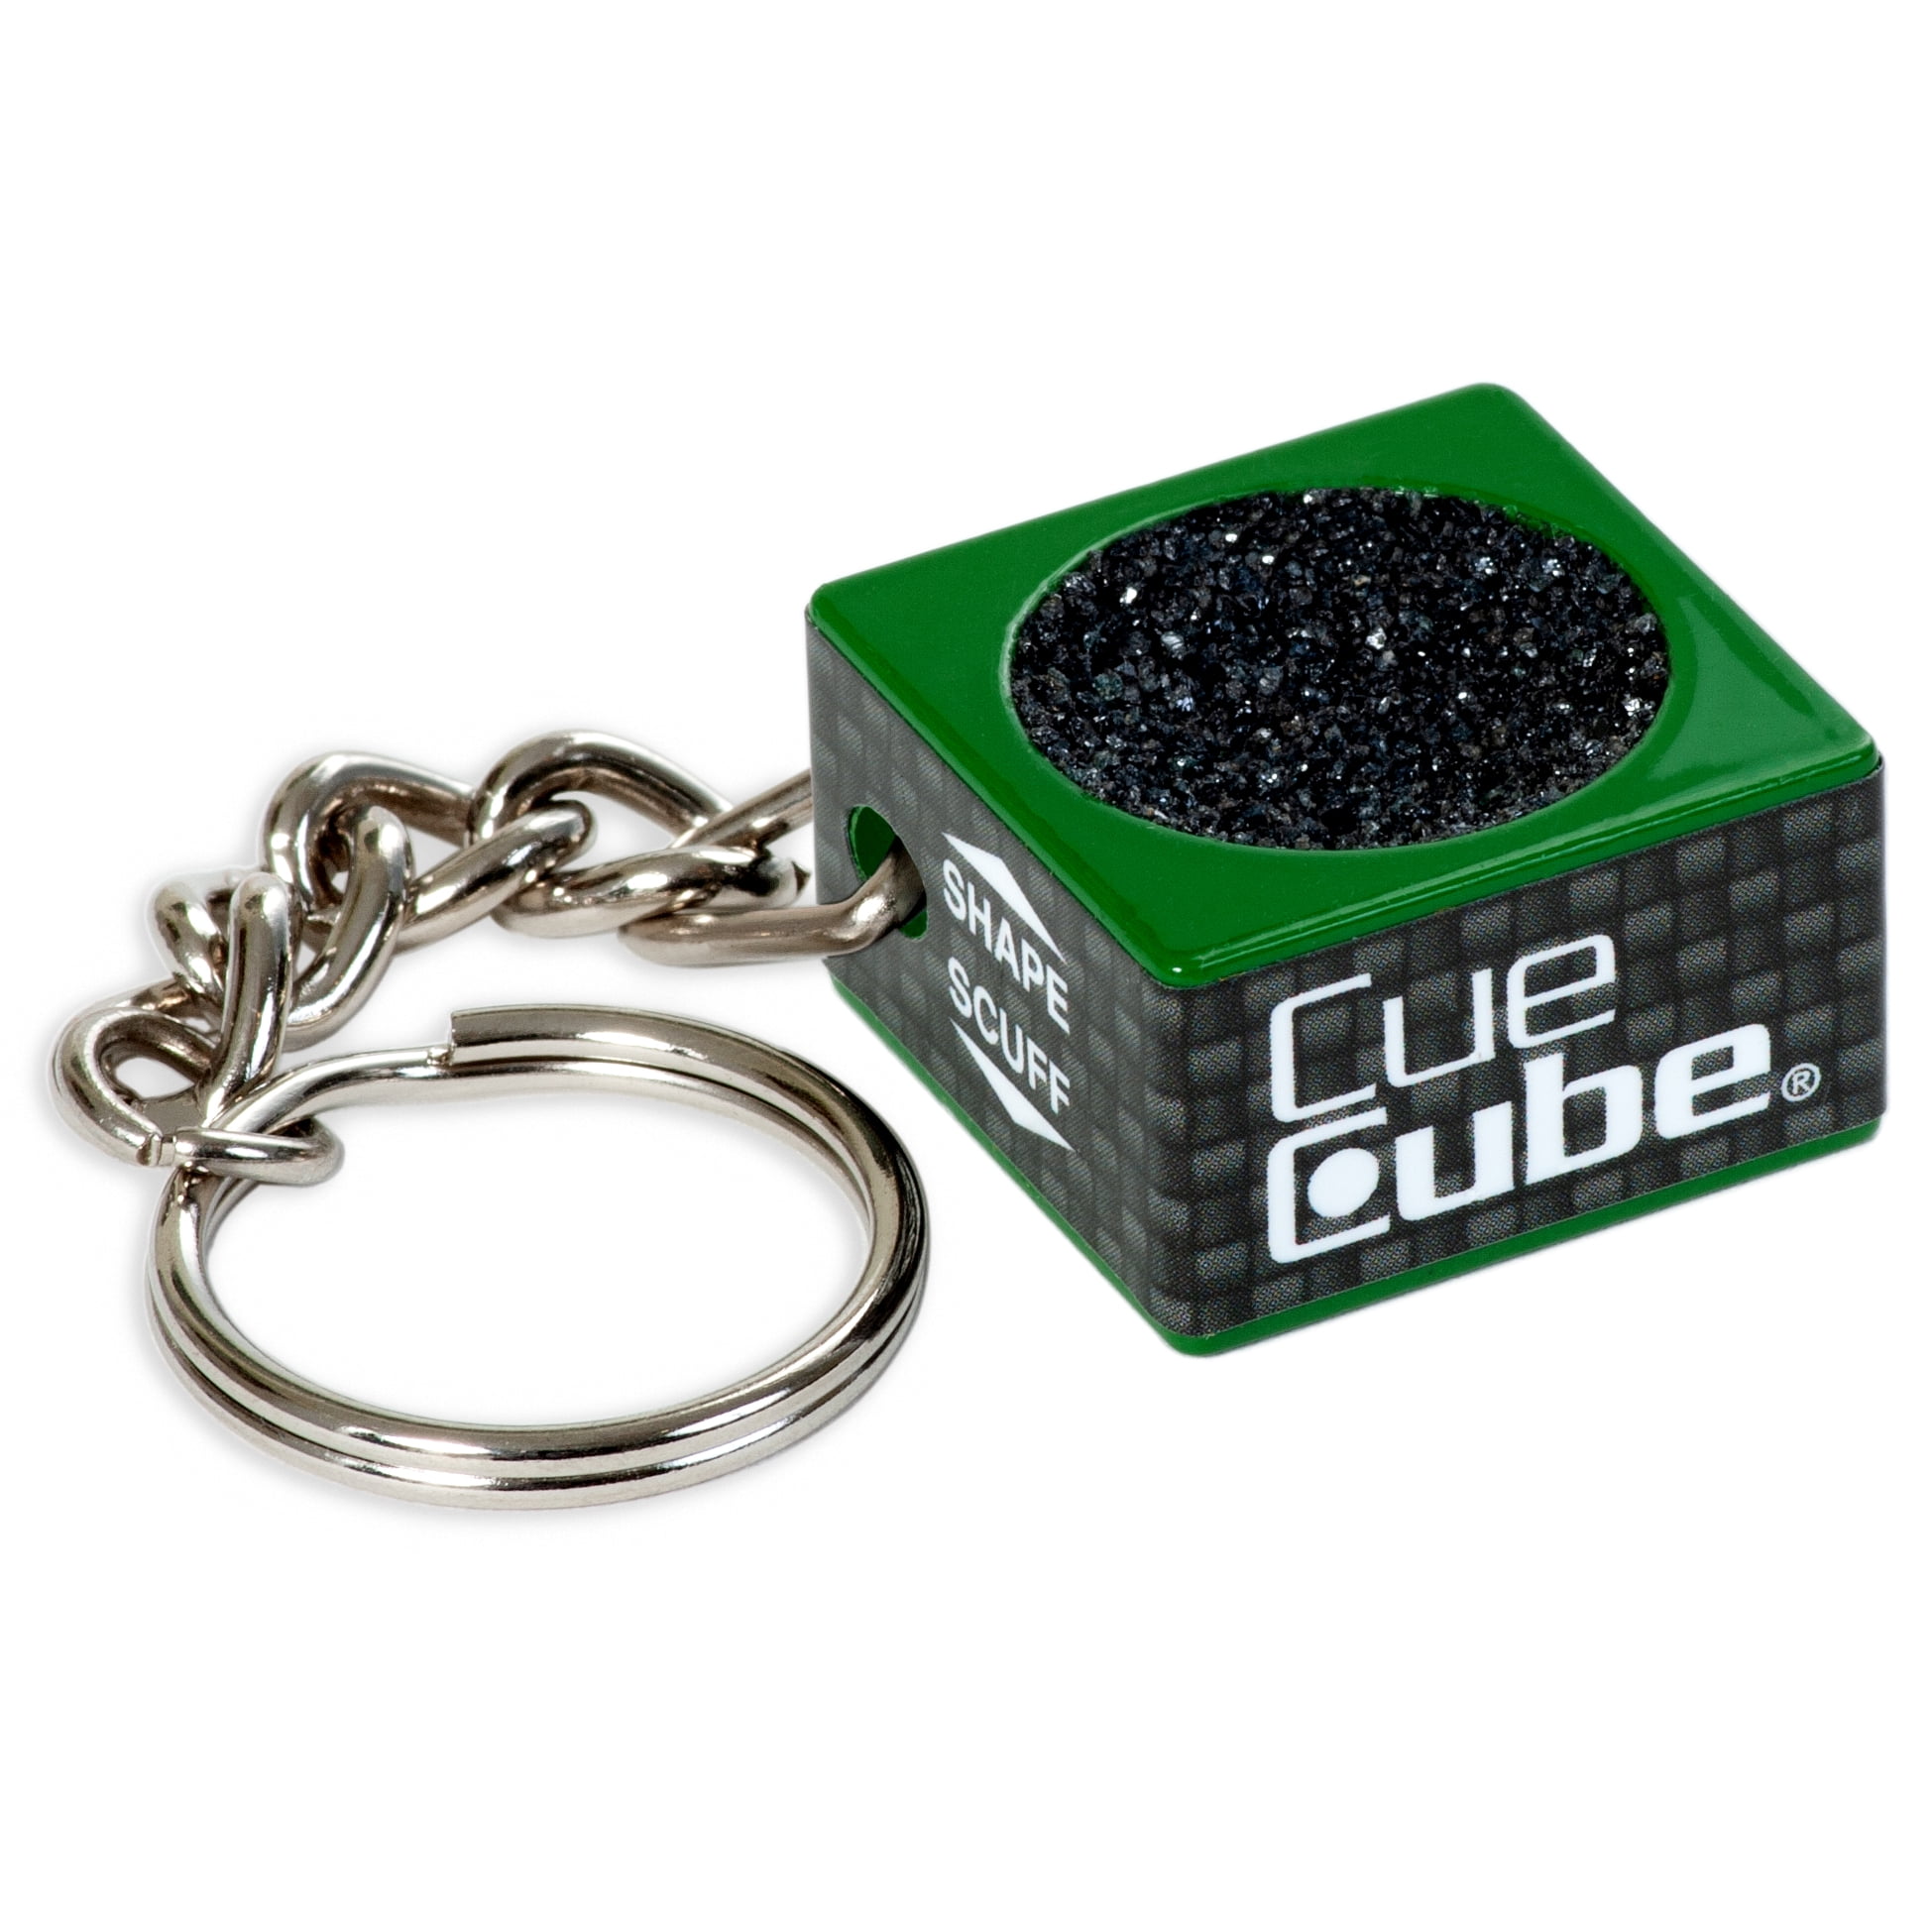 New From Cue Cube Cue Tip Shaper 